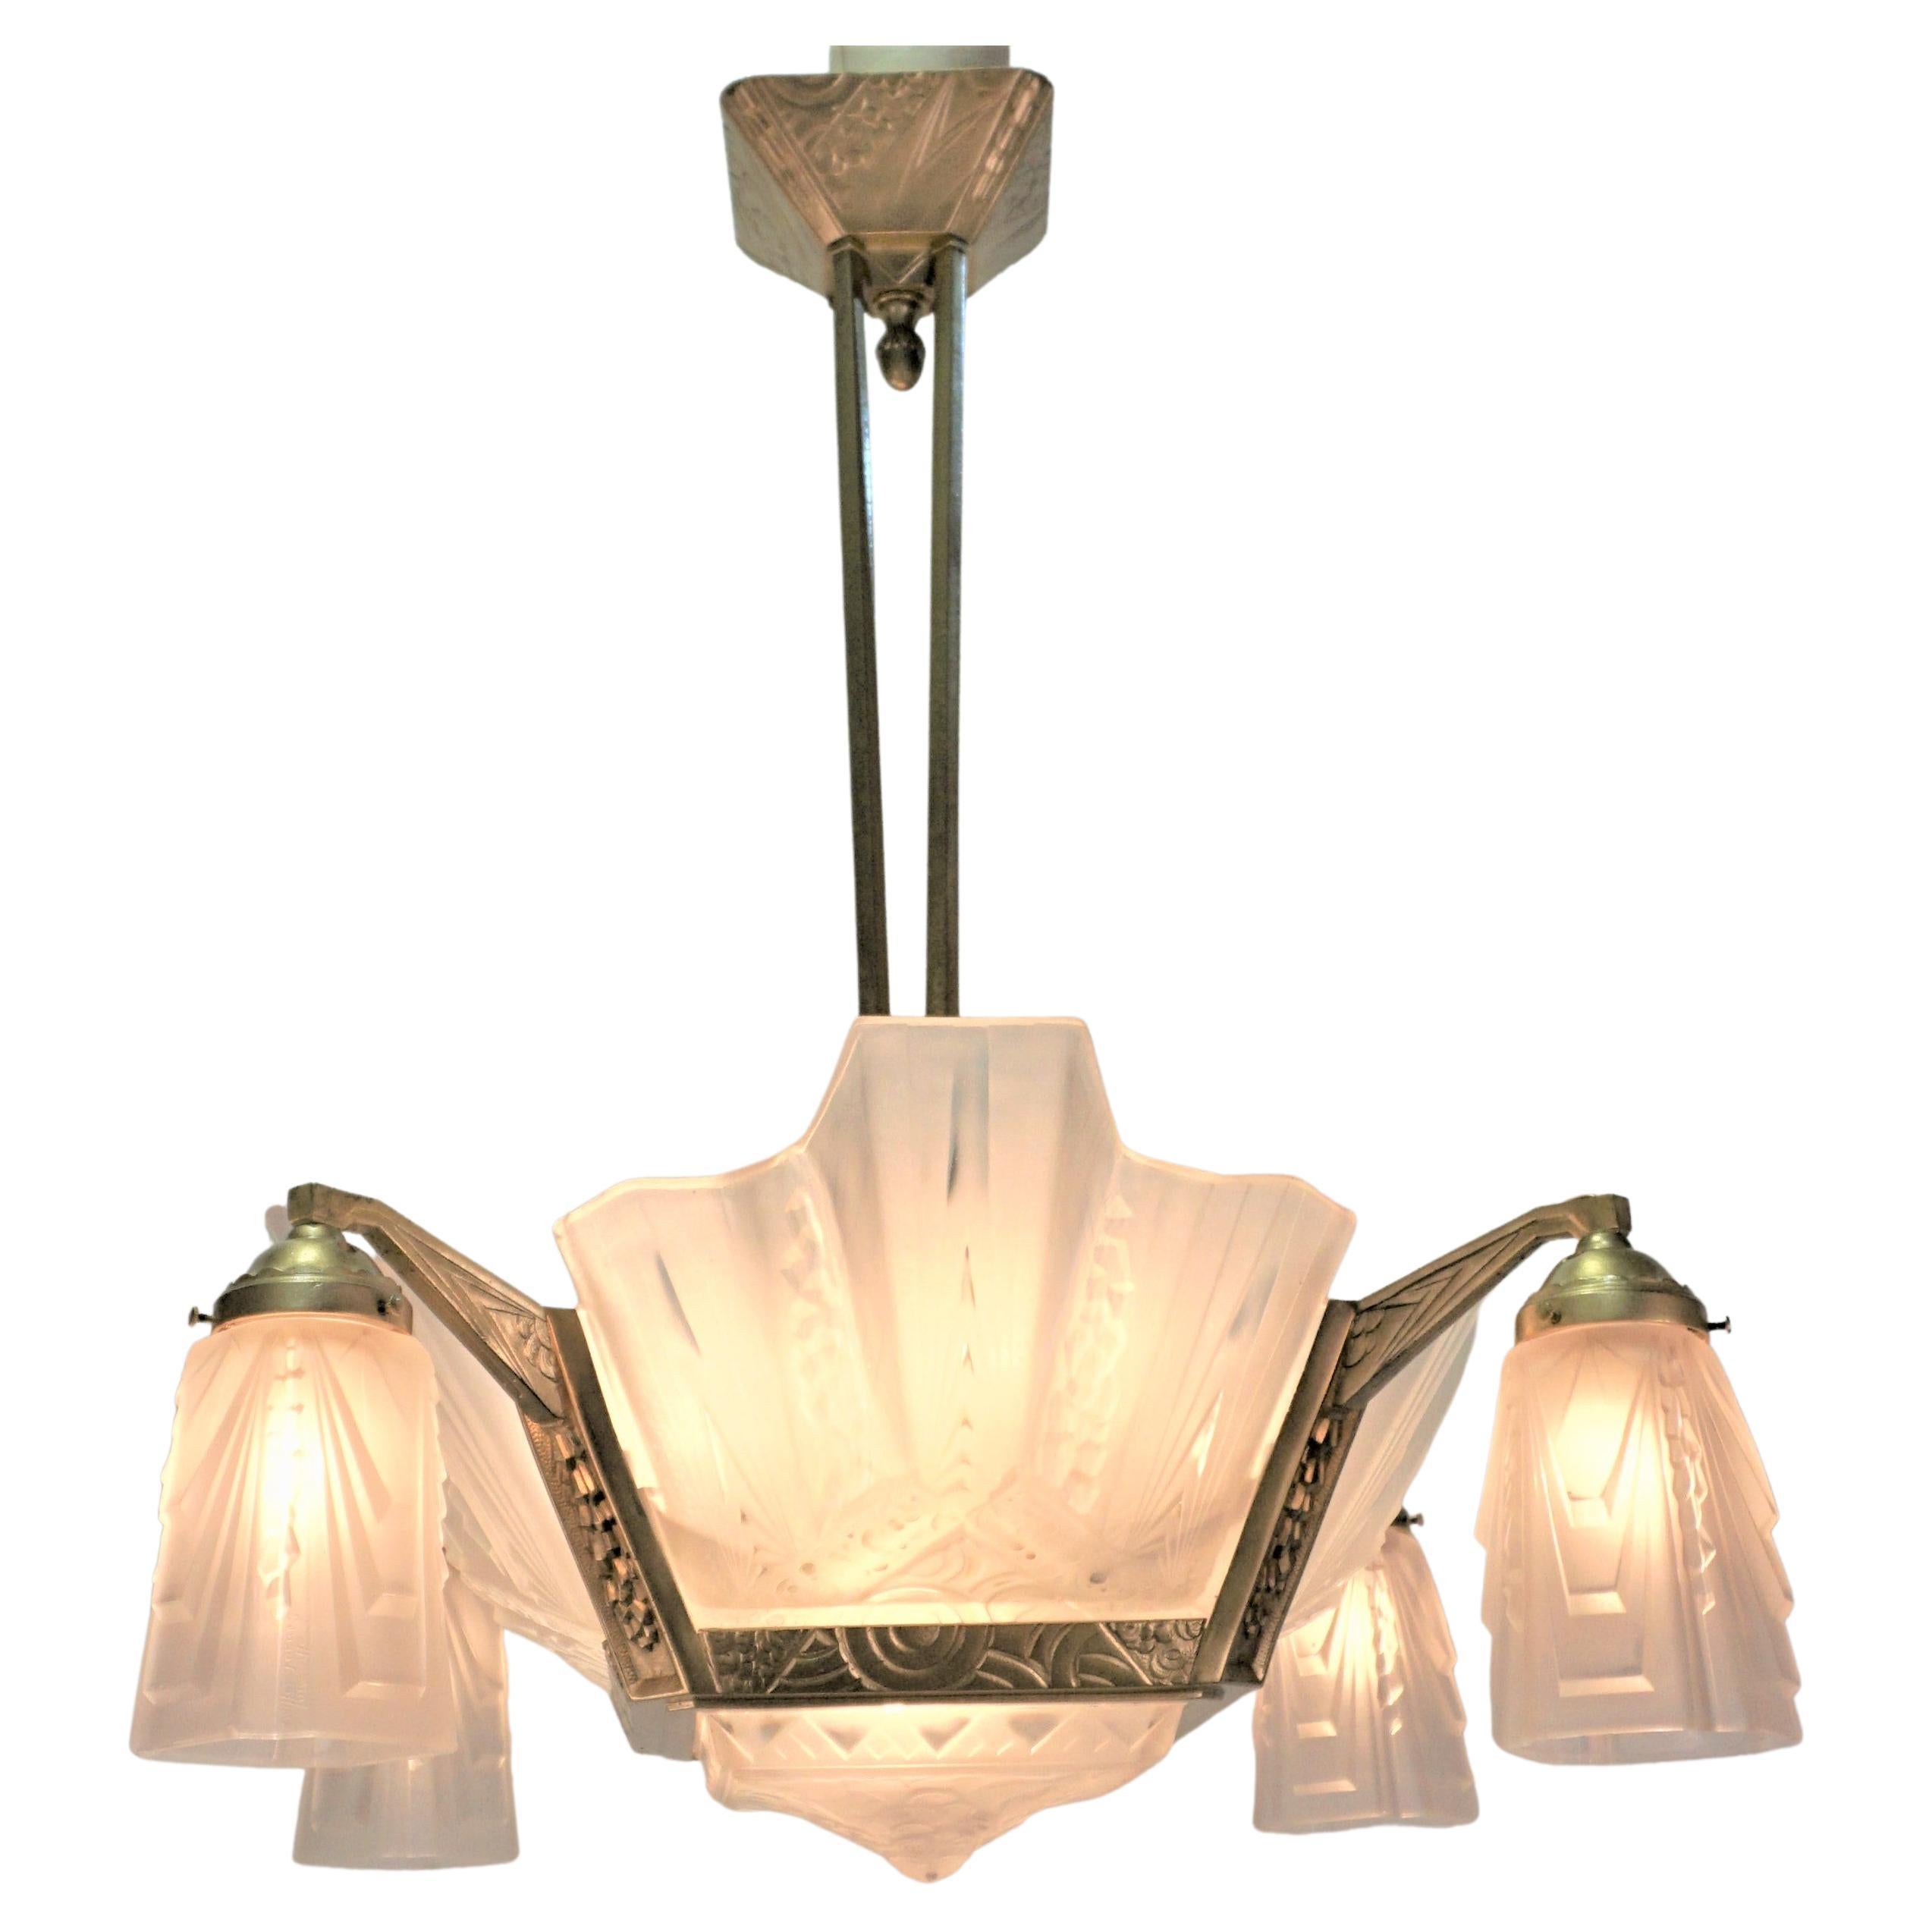 1920's Art Deco Chandelier by Muller Freres 